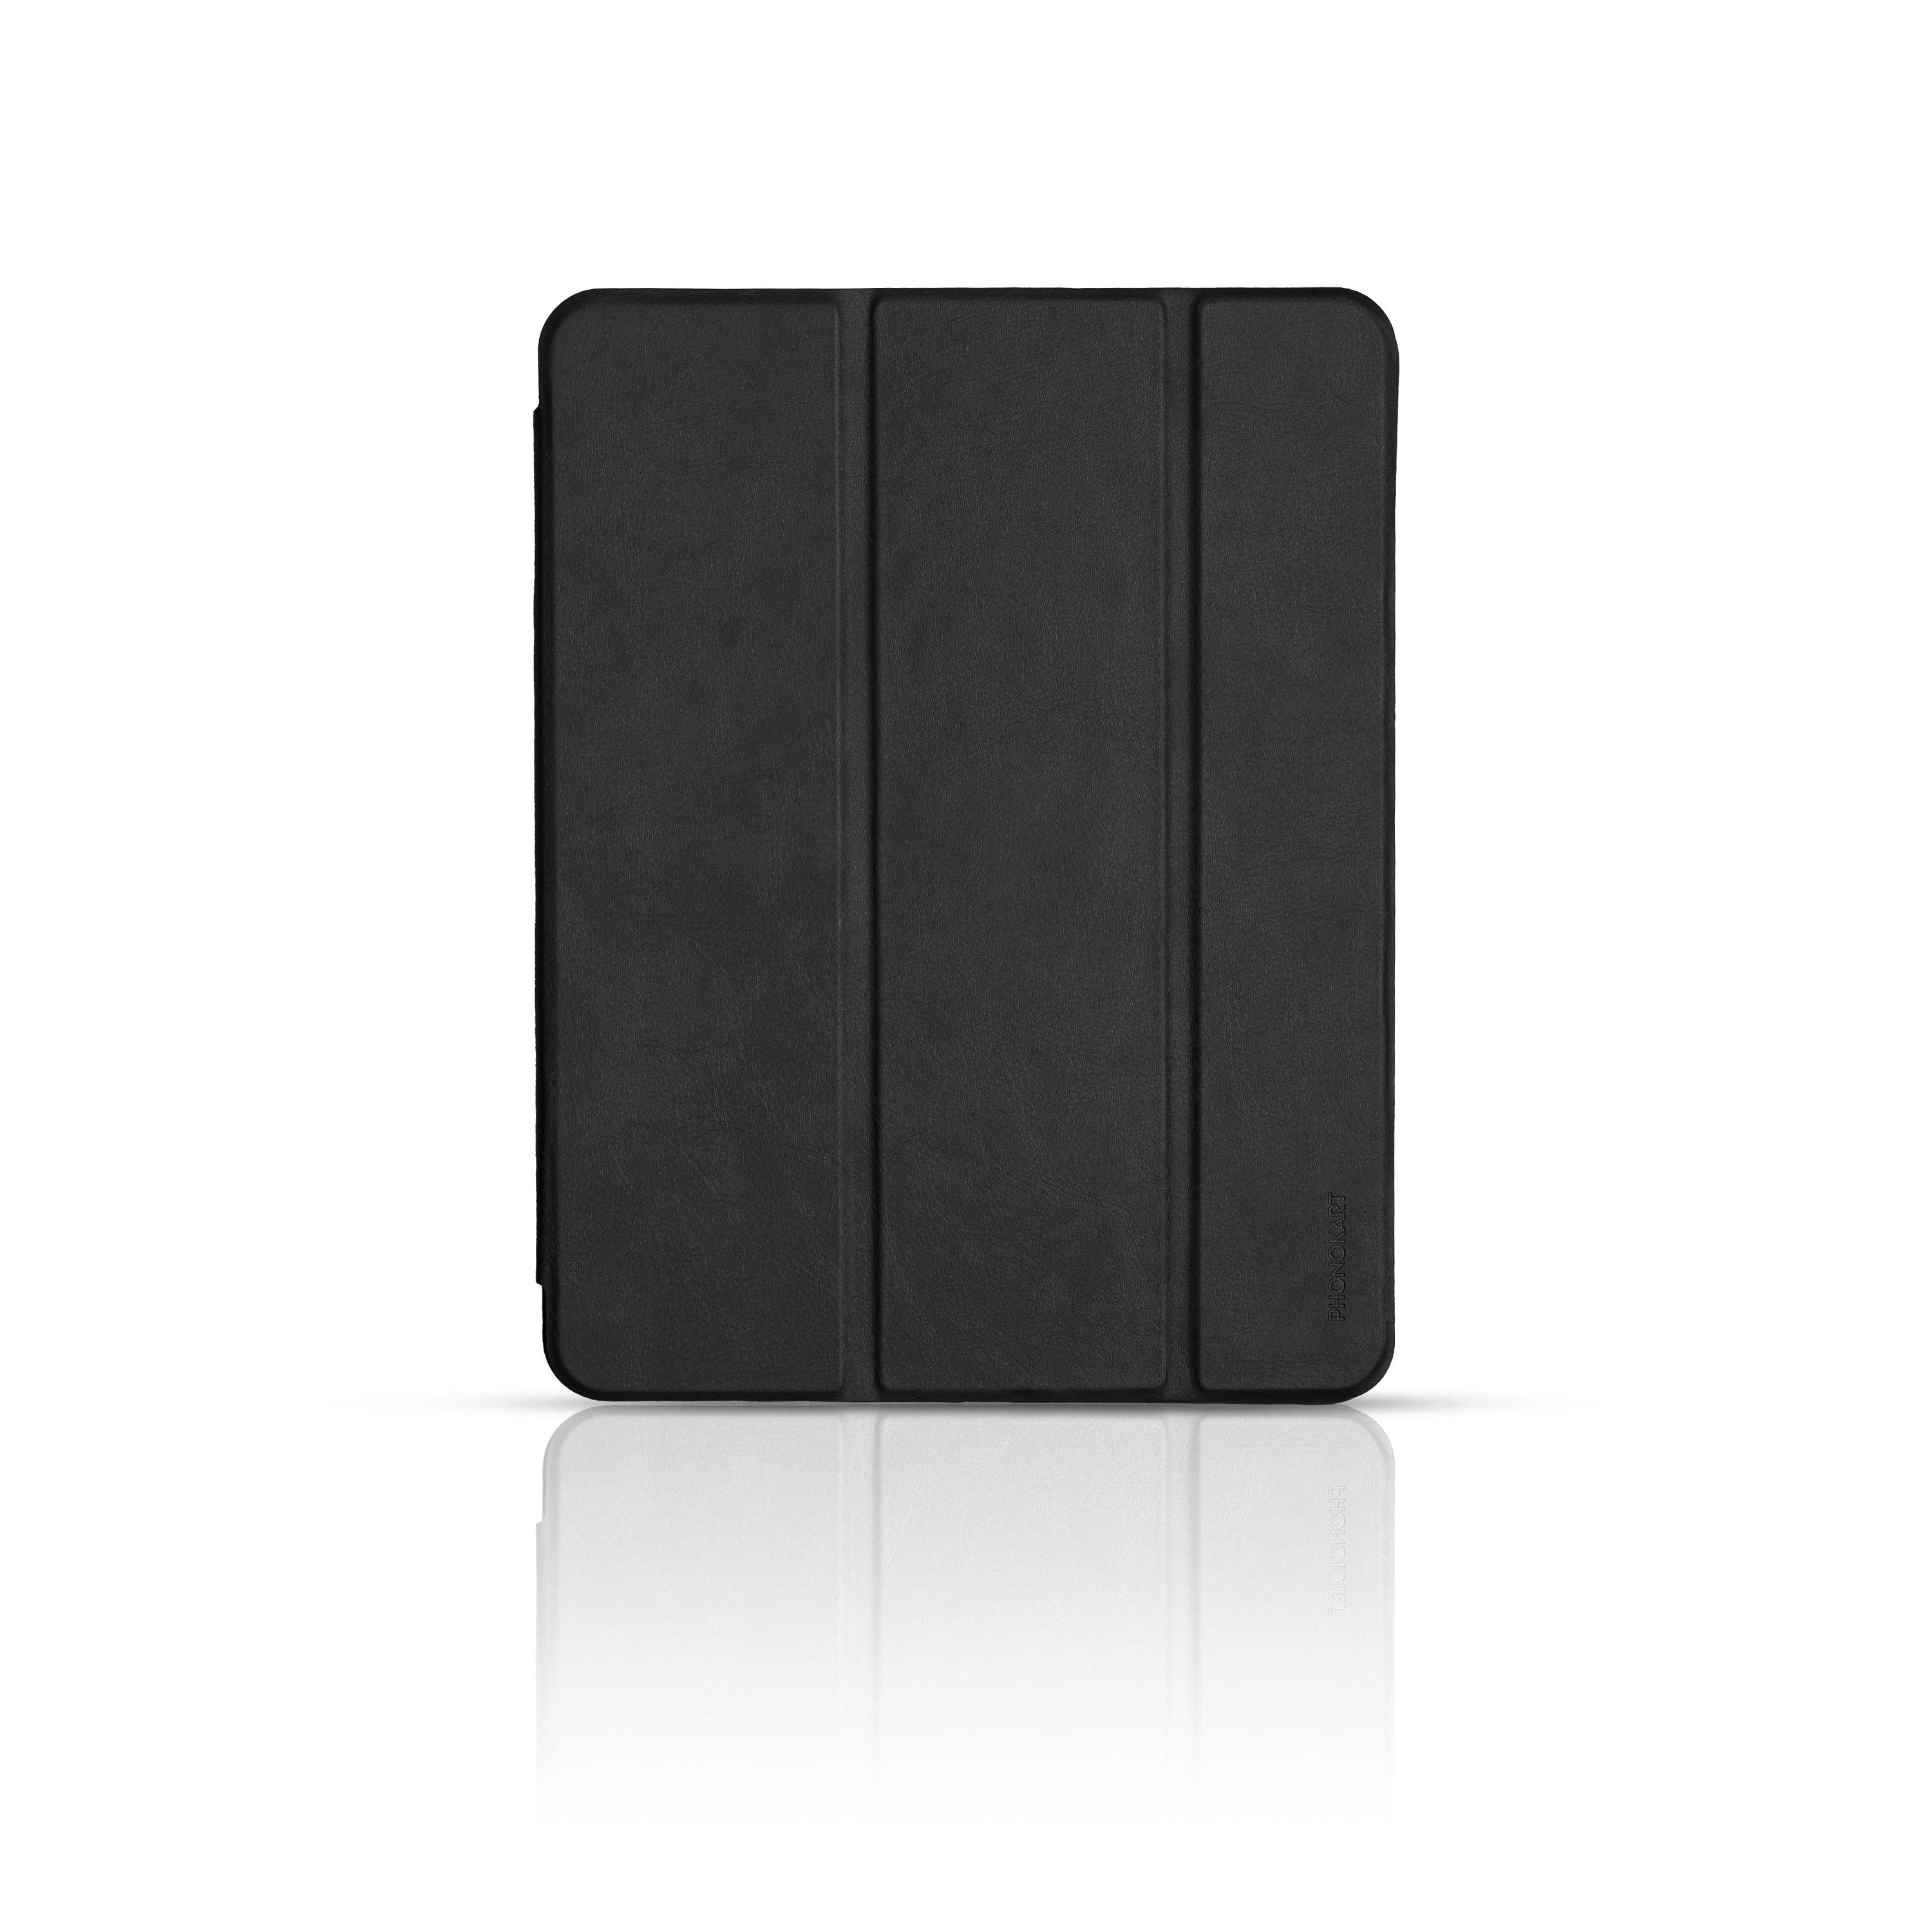 ARMOR FLIP CASE FOR IPAD 10.2/10.5 INCH WITH PENCIL HOLDER (I PAD 7,8,9 Gen, Air 3rd Gen, IPad Pro)